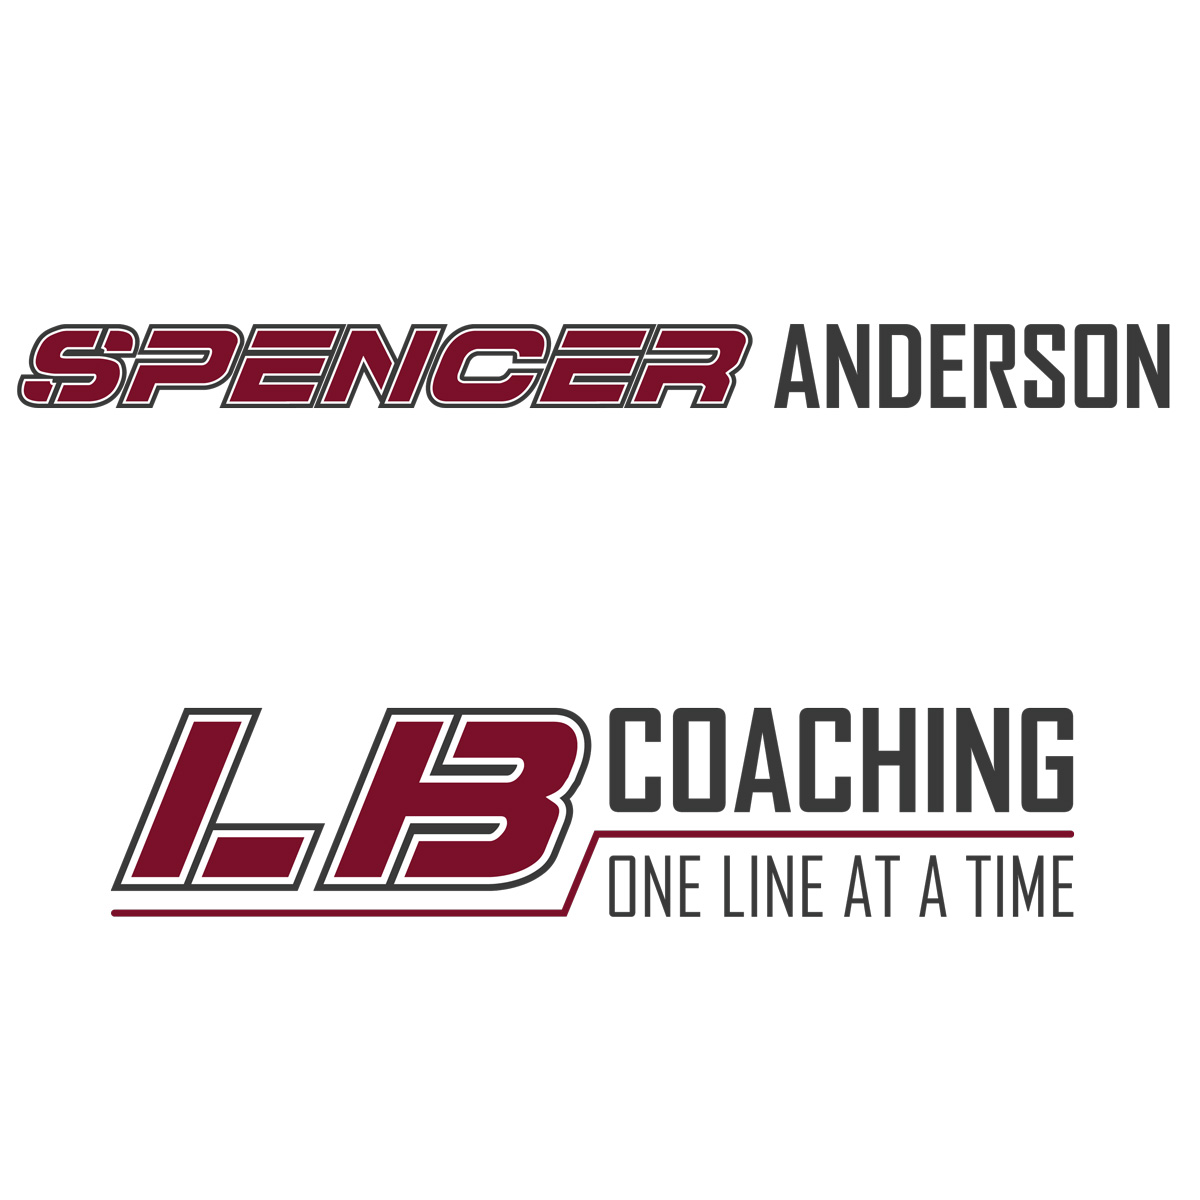 logos-anderson-lbcoaching